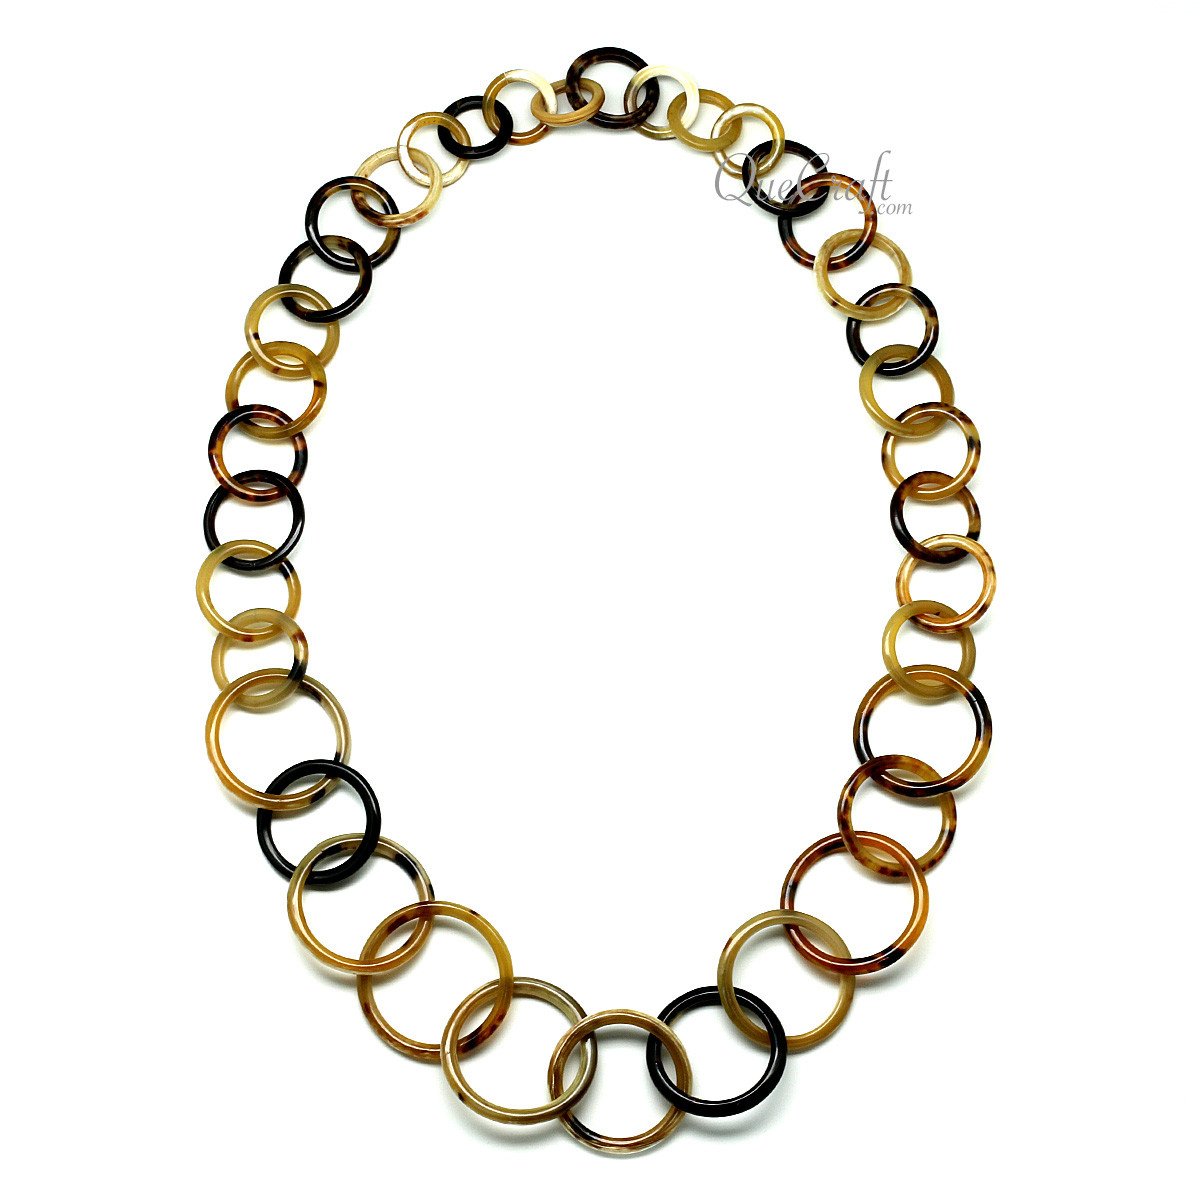 Horn Chain Necklace #11809 - HORN JEWELRY